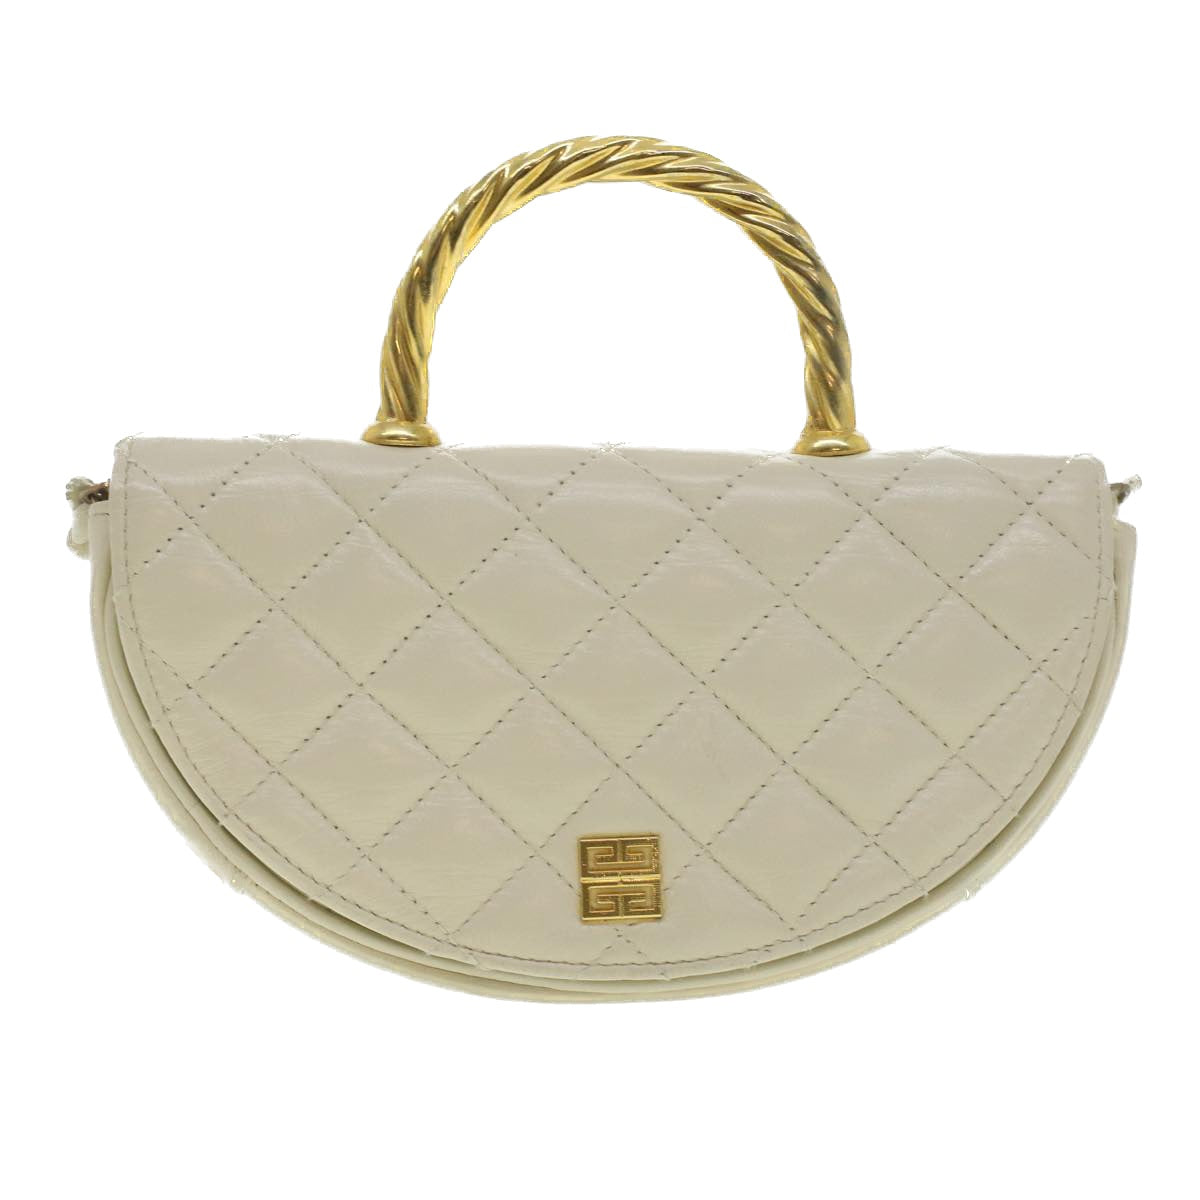 GIVENCHY Matelasse Hand Bag Leather 2way White Gold Auth 37405